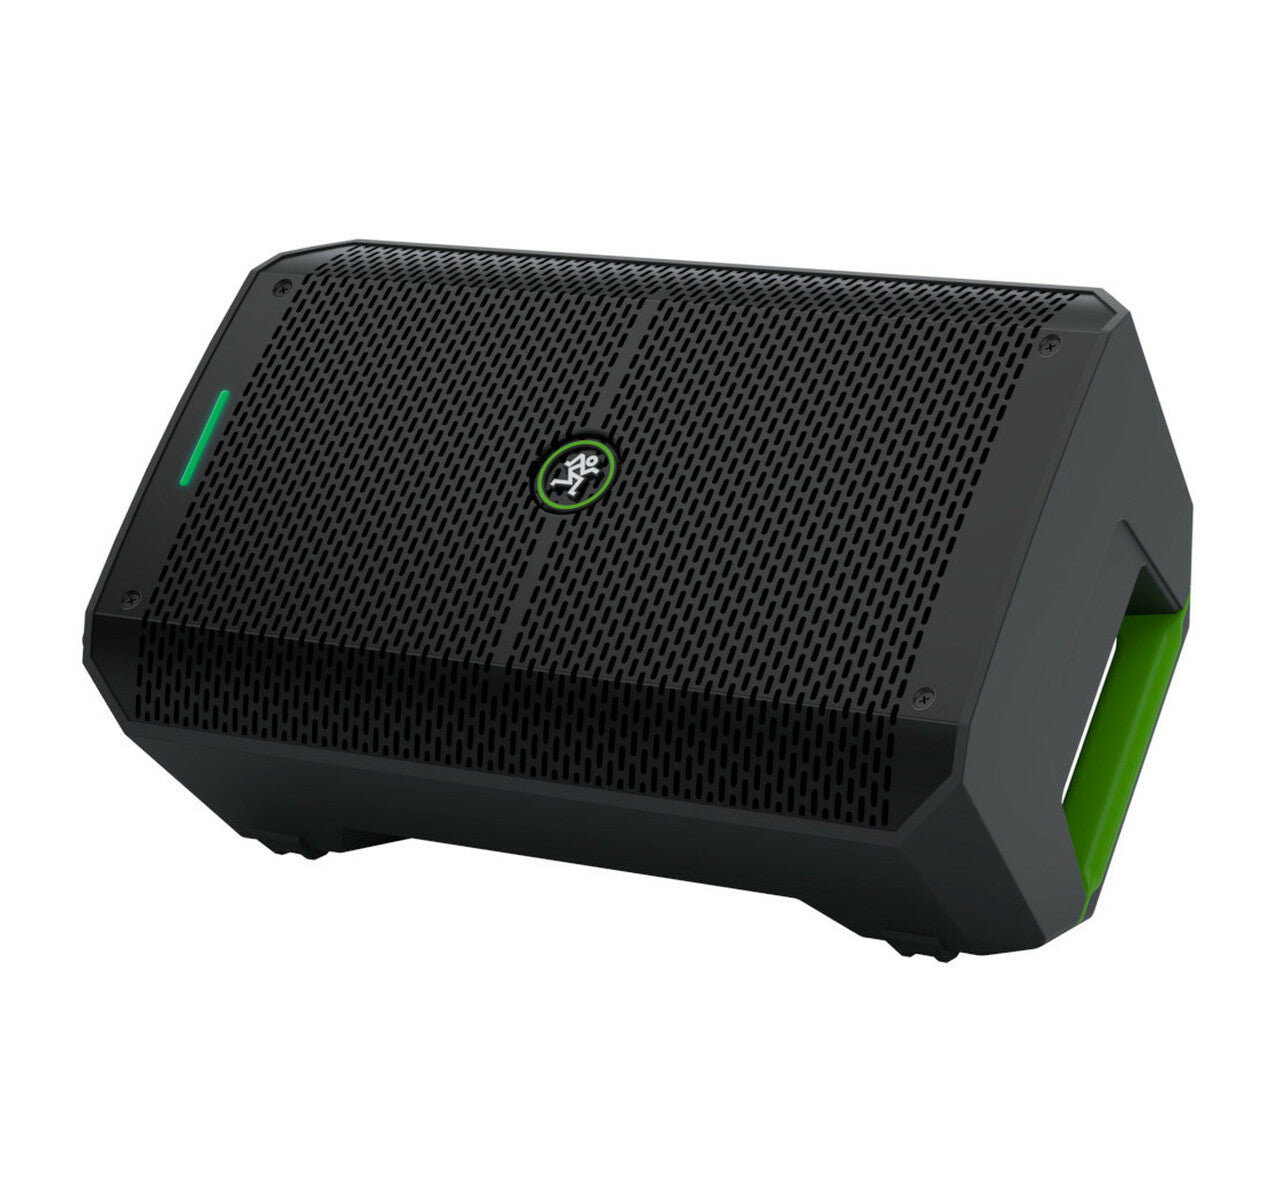 Mackie Thump GO 8" Portable Battery-Powered Rechargeable DJ PA Bluetooth Speaker+ Mackie Thump GO Carry Bag+Get Free Mackie Microphone EM89D!!